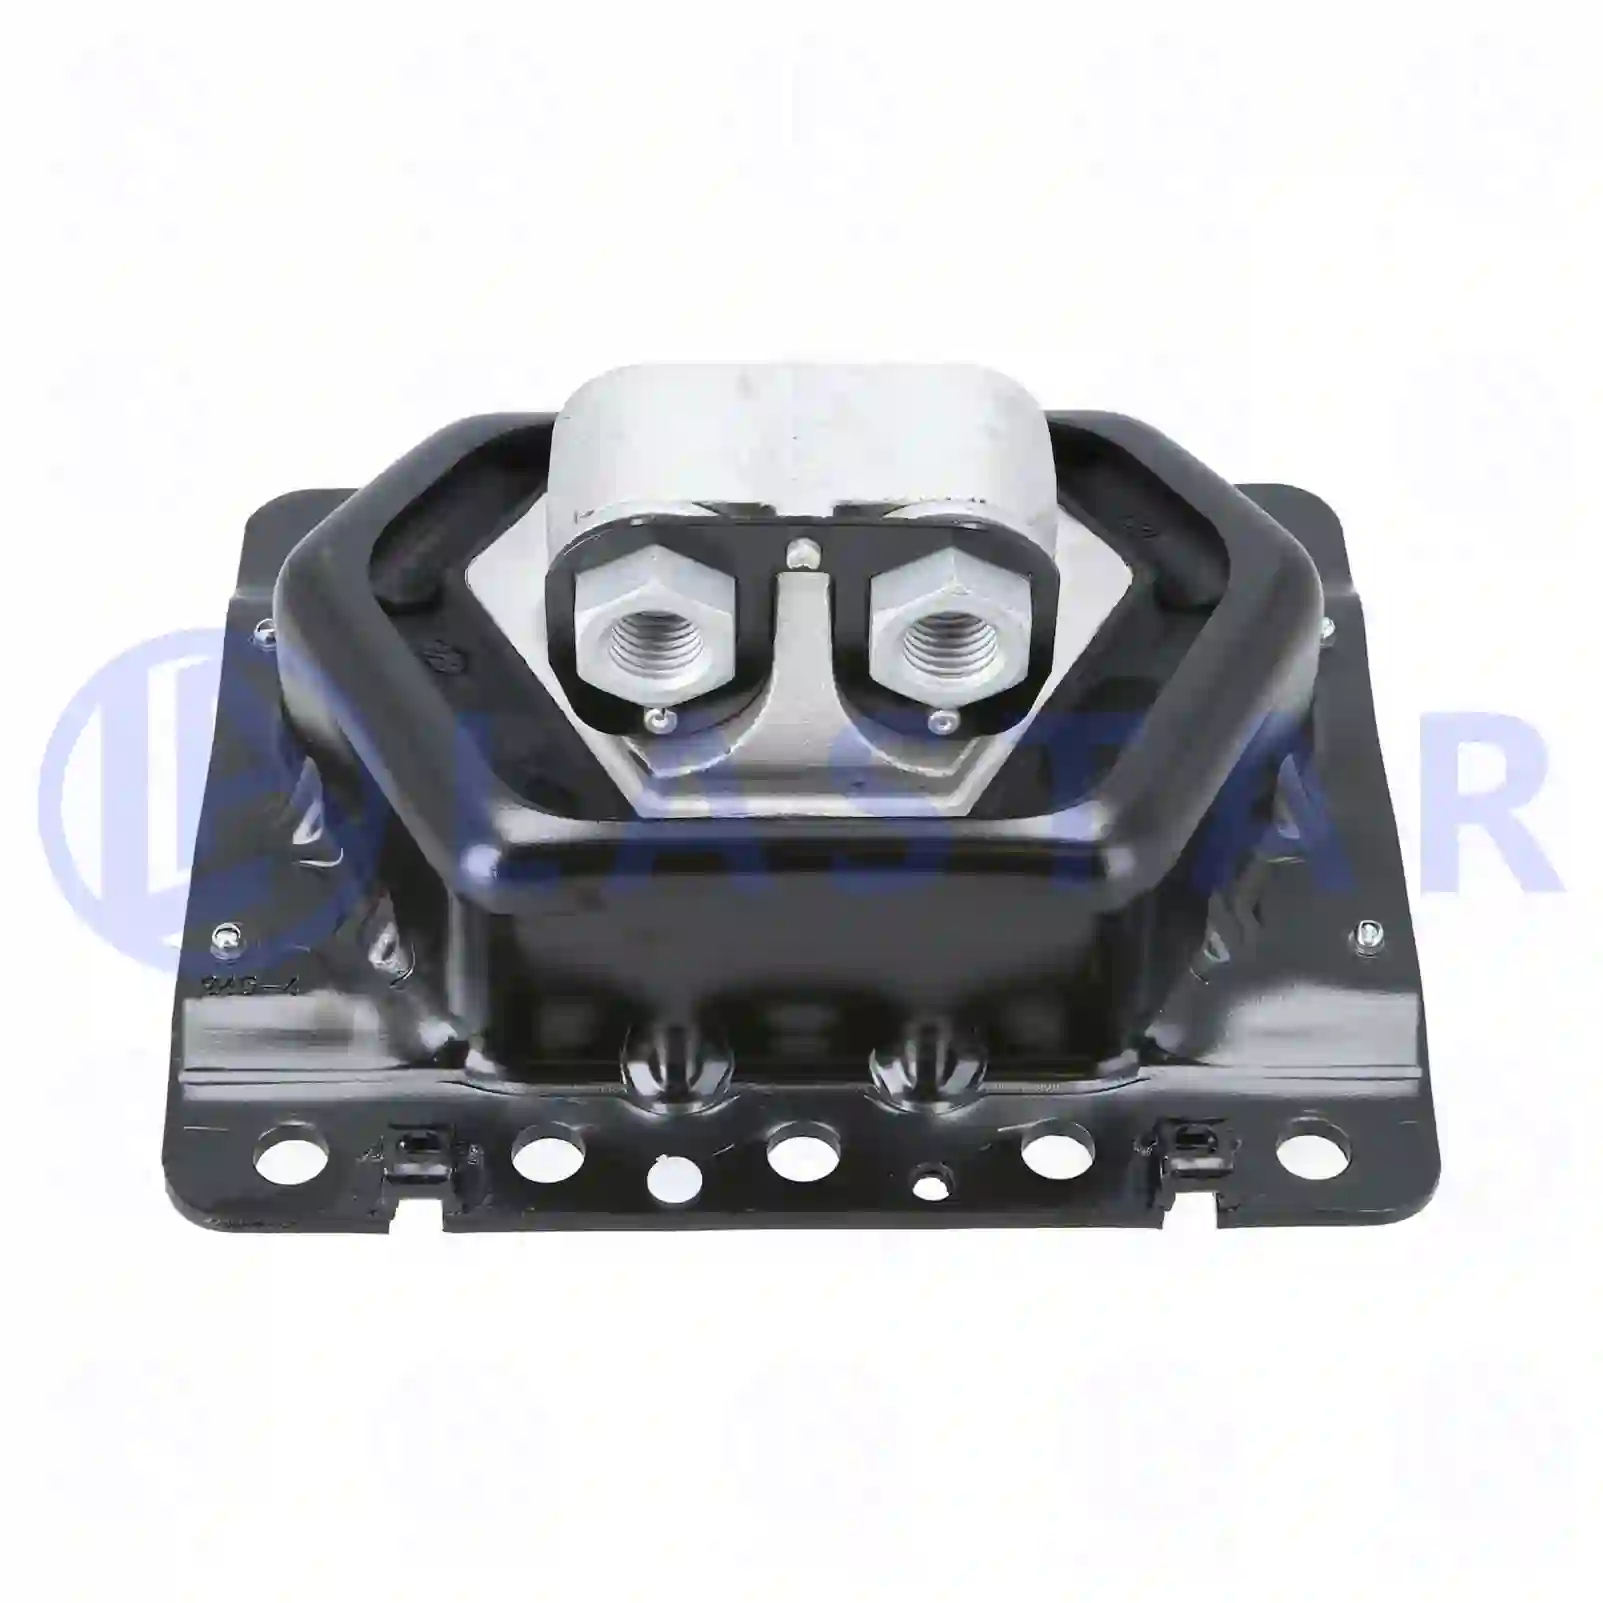 Engine mounting, 77704312, 20499474, ZG01102-0008, , ||  77704312 Lastar Spare Part | Truck Spare Parts, Auotomotive Spare Parts Engine mounting, 77704312, 20499474, ZG01102-0008, , ||  77704312 Lastar Spare Part | Truck Spare Parts, Auotomotive Spare Parts